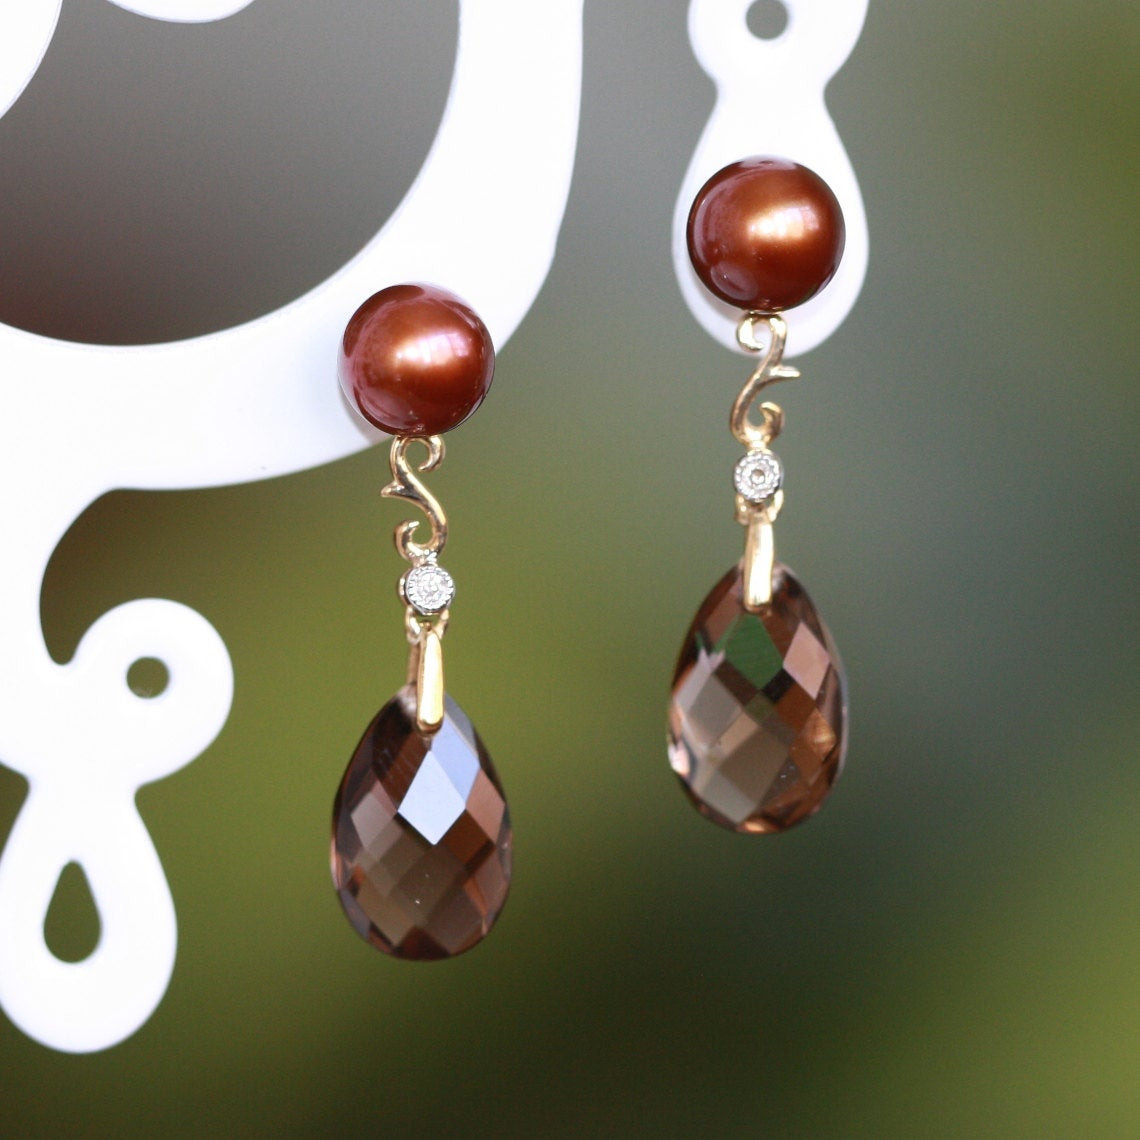 Chocolate Pearl Earrings
 Smoky Quartz and Chocolate Pearl Earrings in 10k Yellow Gold